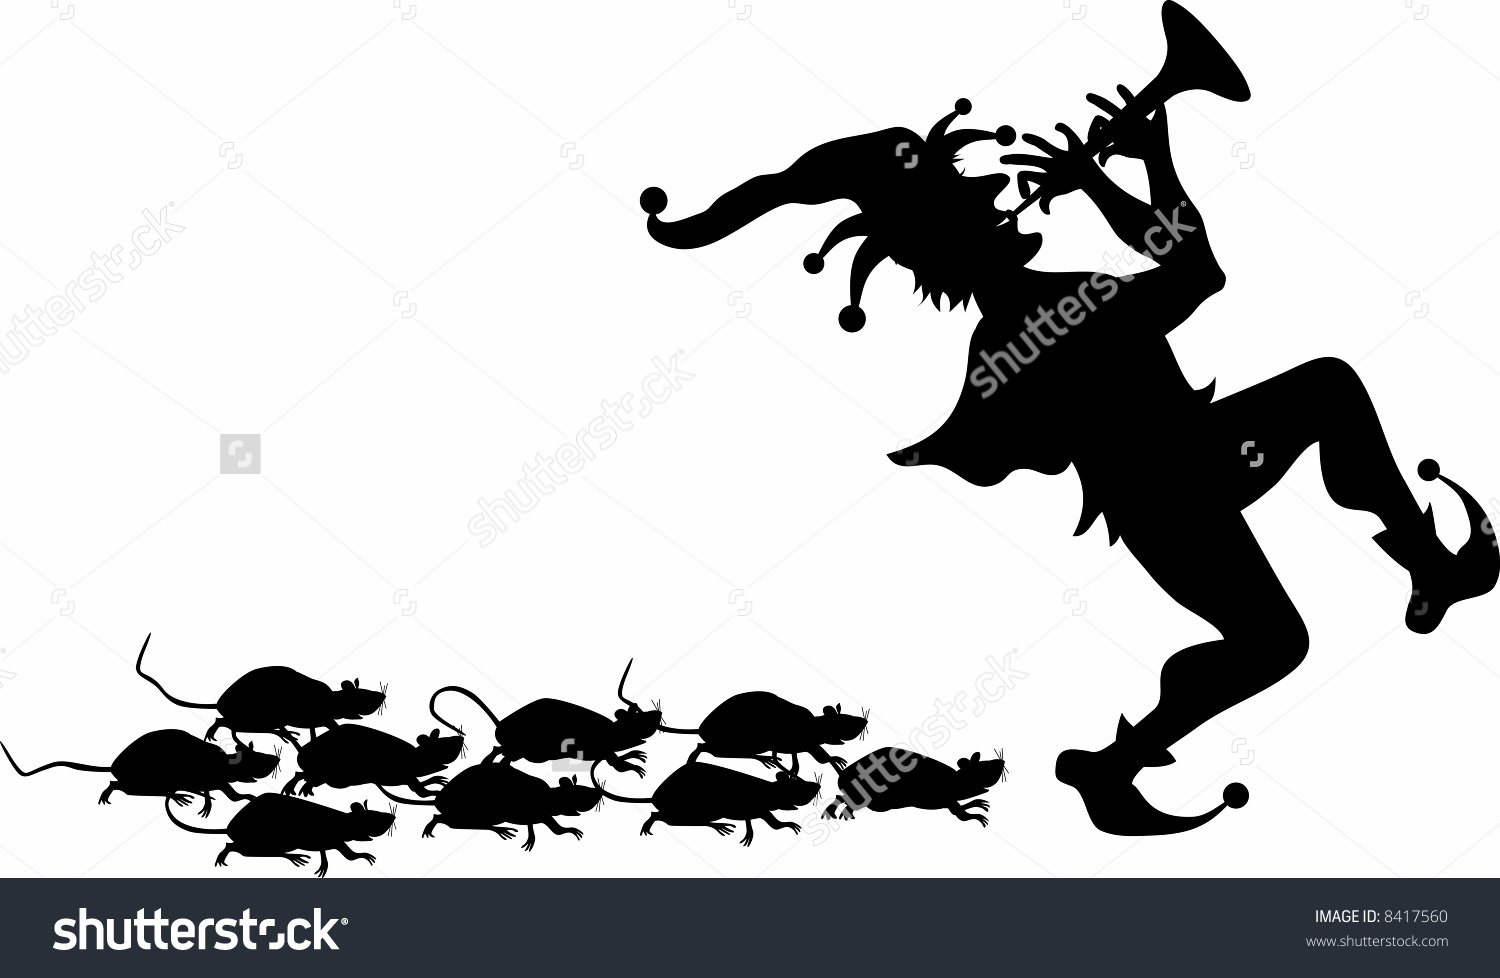 Pied piper of hamelin clipart.